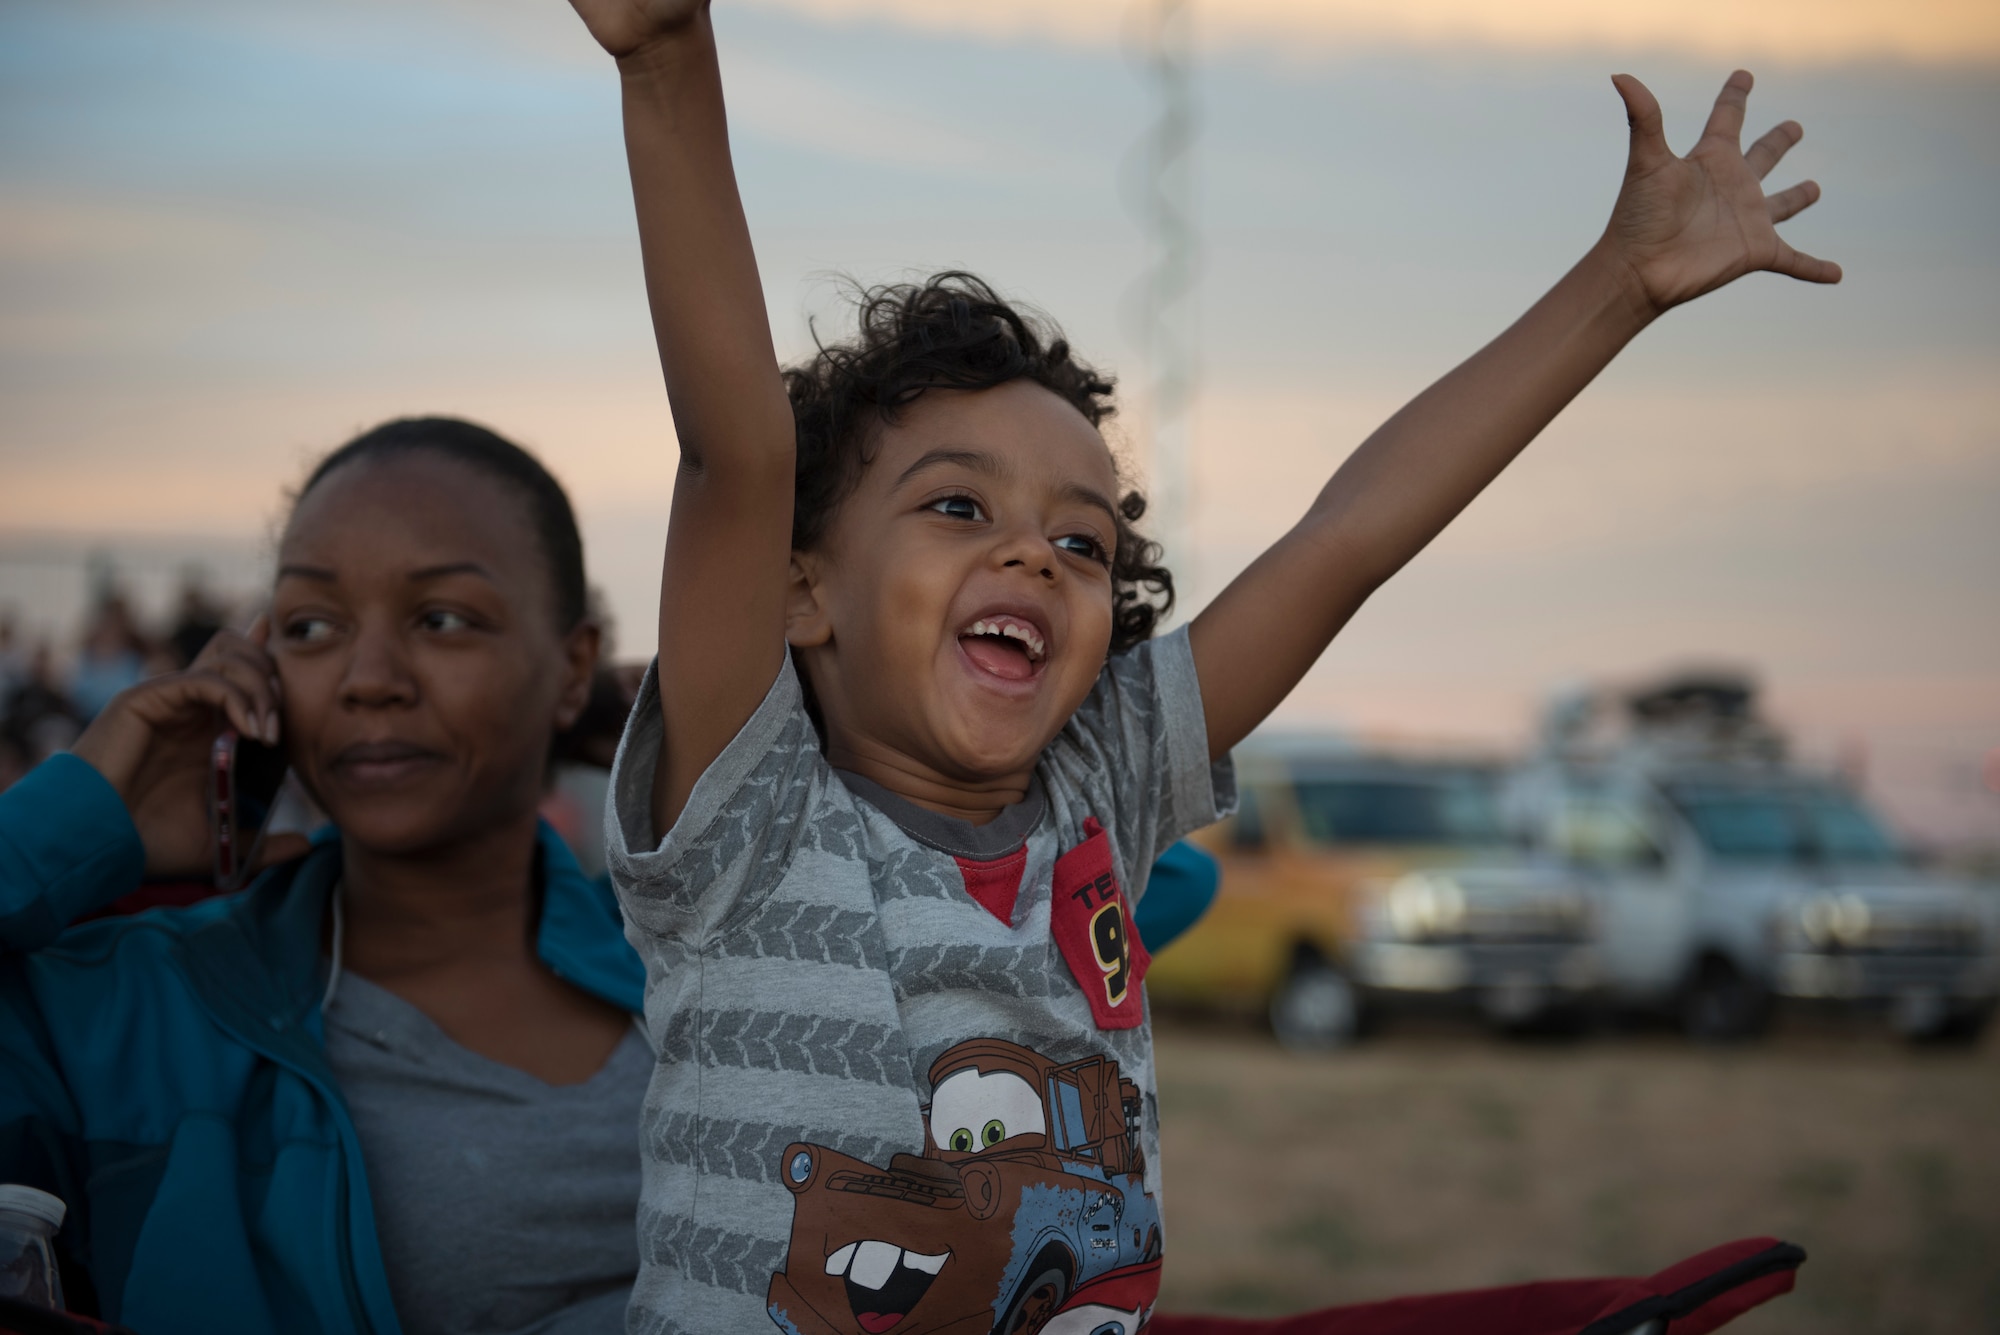 Mekhi Hodgman, 5, shows his excitement as he waits for the start of the Intel Shooting Star Drone light show, while his mother, Joyce Hodgman, a community based therapist, answers a phone call at Travis Air Force Base, Calif., July 5, 2018. The event featured numerous activities including music, bounce houses and an eight minute light show with 500 drones. (U.S. Air Force photo by Tech. Sgt. James Hodgman)